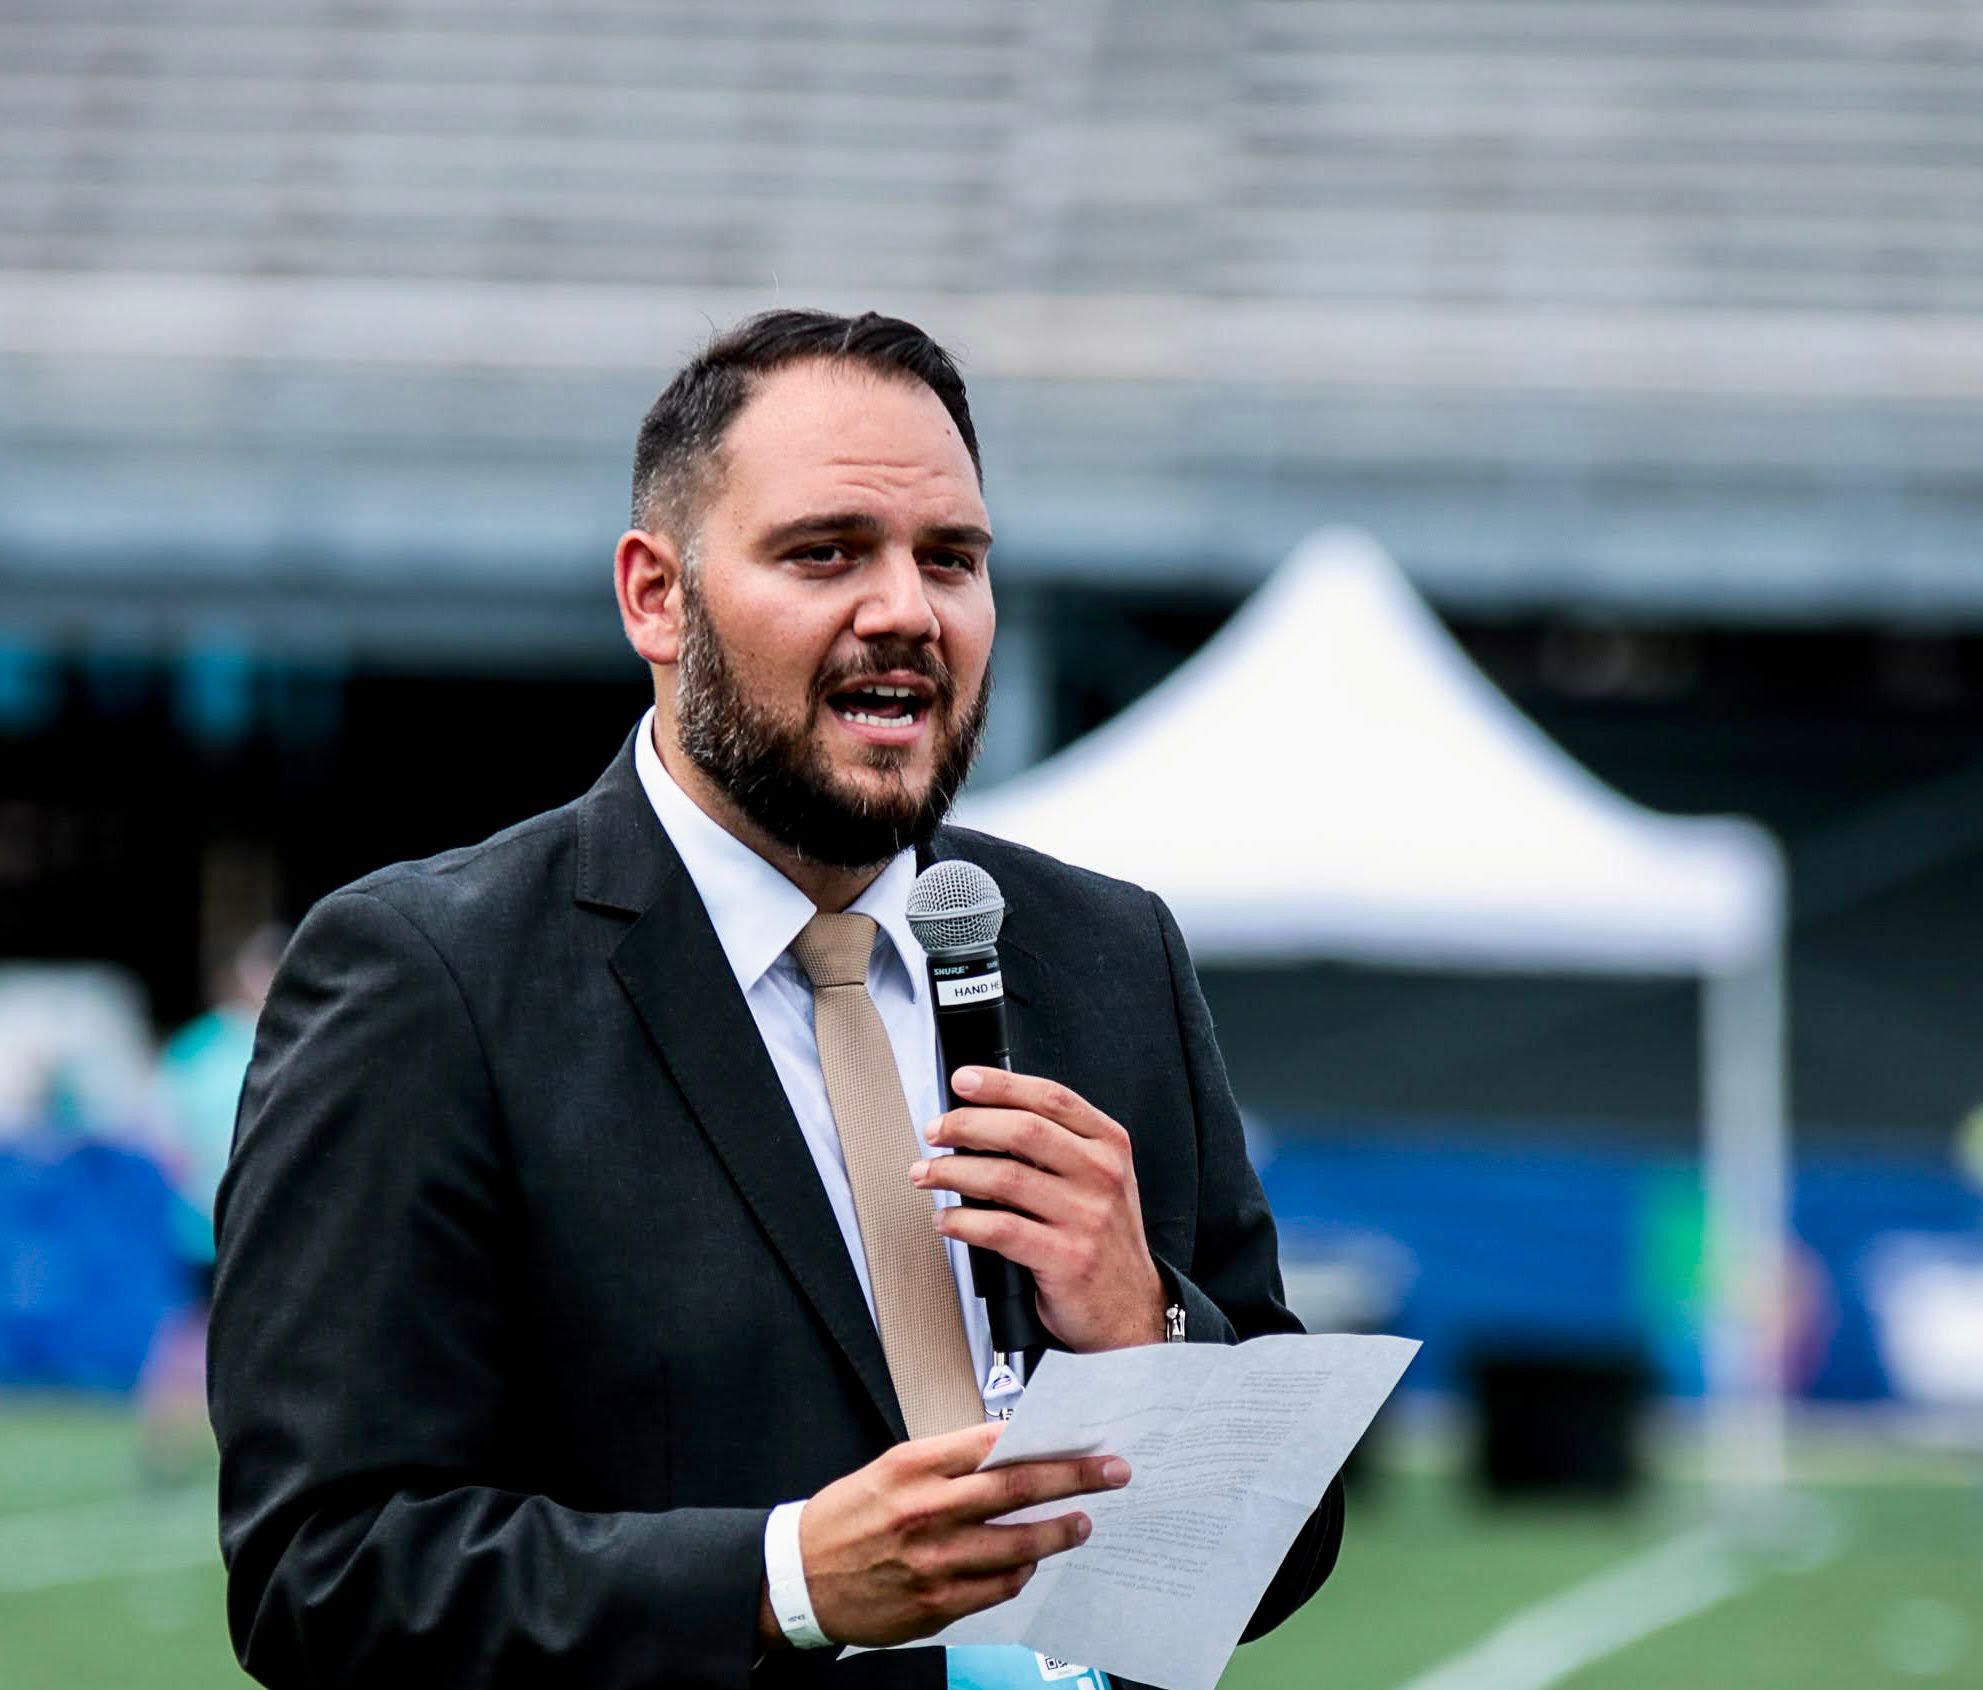 Pierre Trochet described 2022 as a defining year for the International Federation of American Football ©IFAF